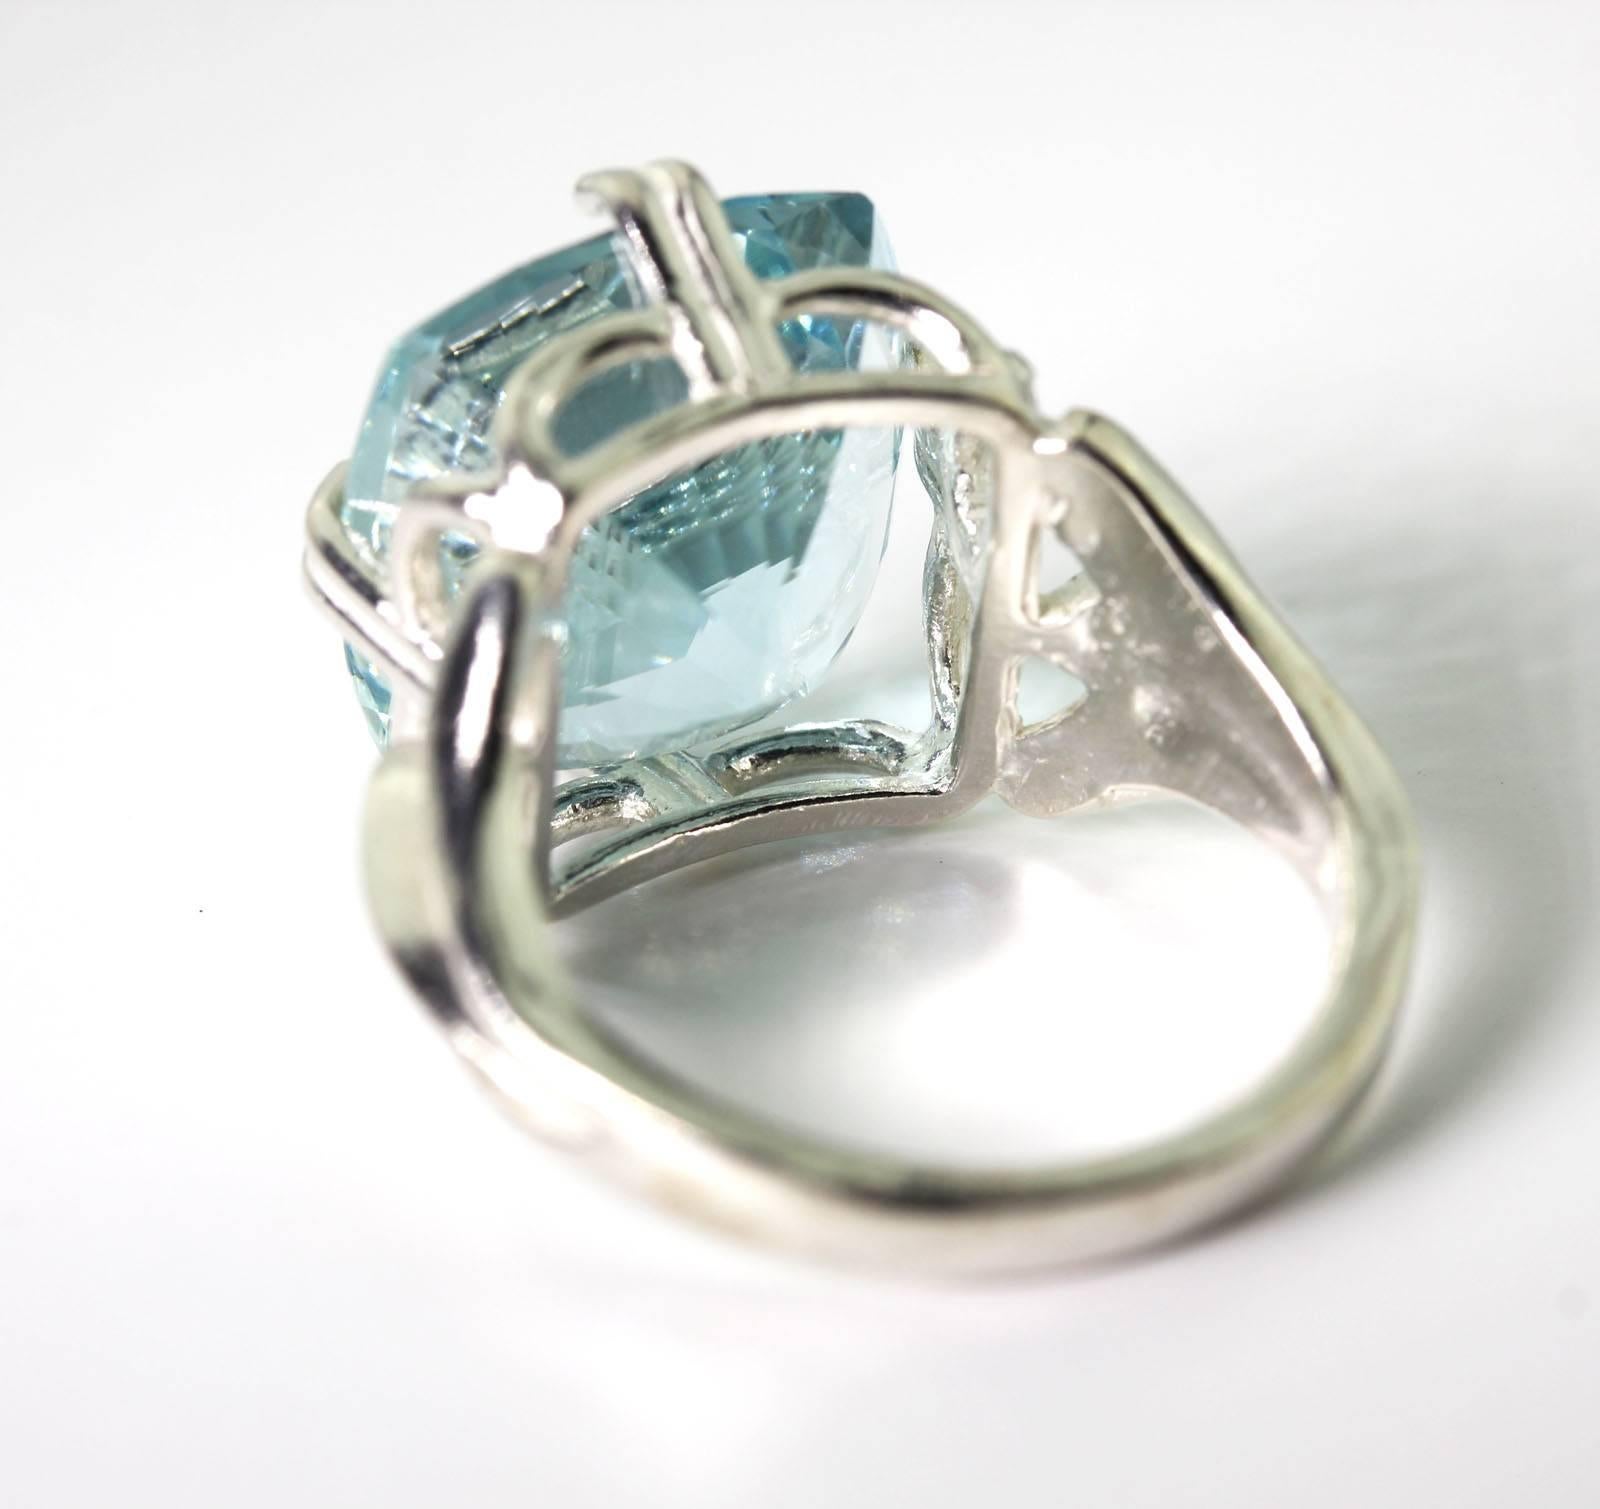 Women's 9.85 Carat Spectacular Glittering Blue Aquamarine Sterling Silver Party Ring